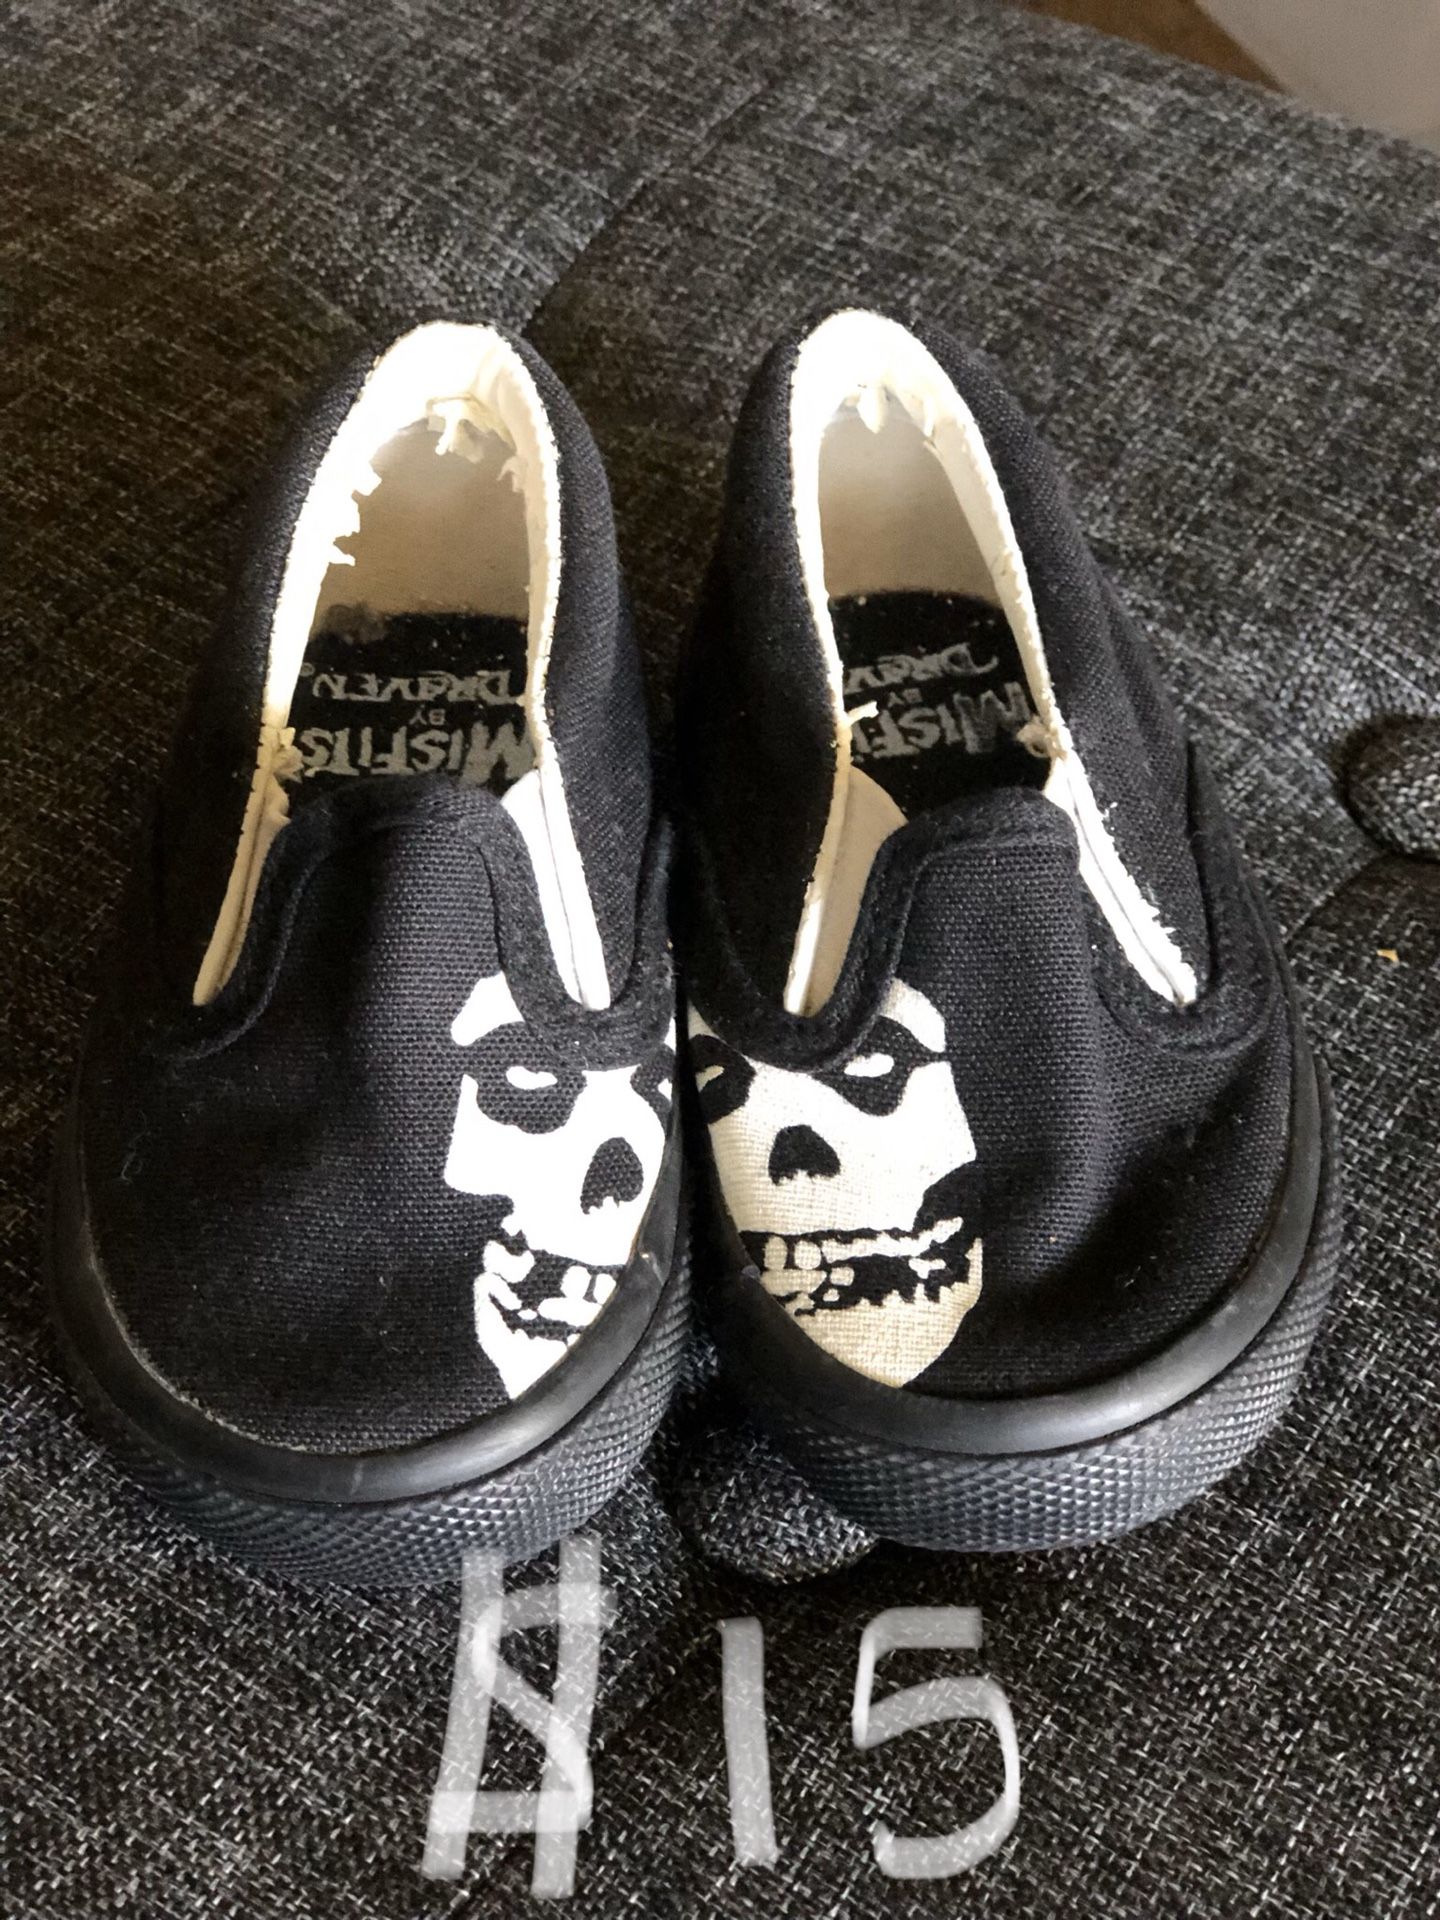 The misfits baby/toddler shoes size 4